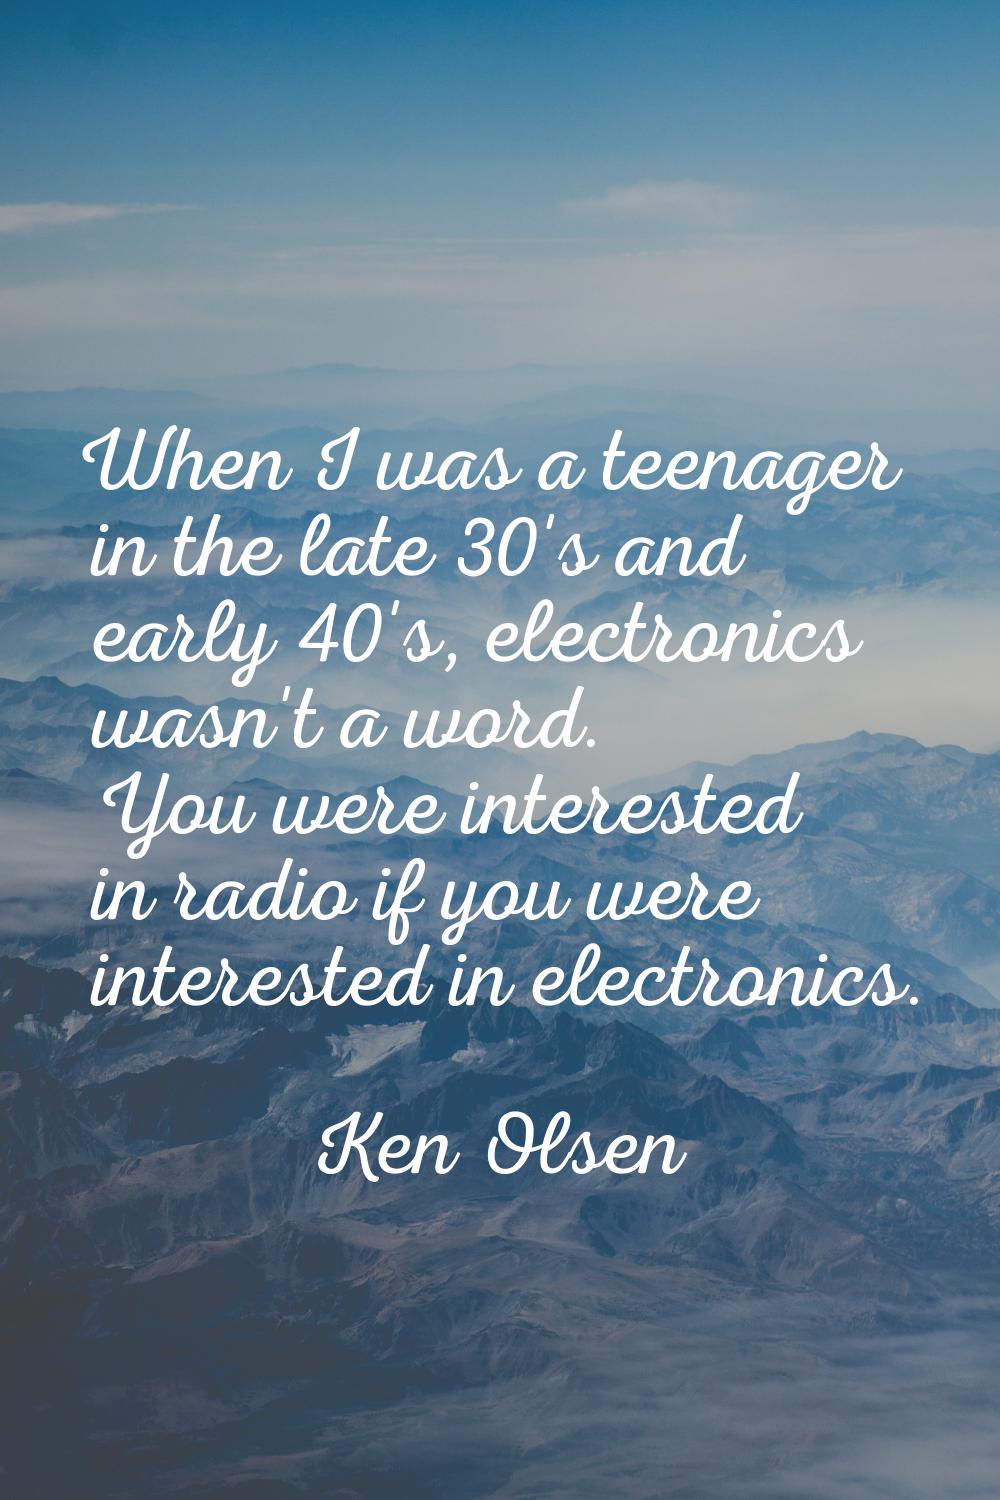 When I was a teenager in the late 30's and early 40's, electronics wasn't a word. You were interest